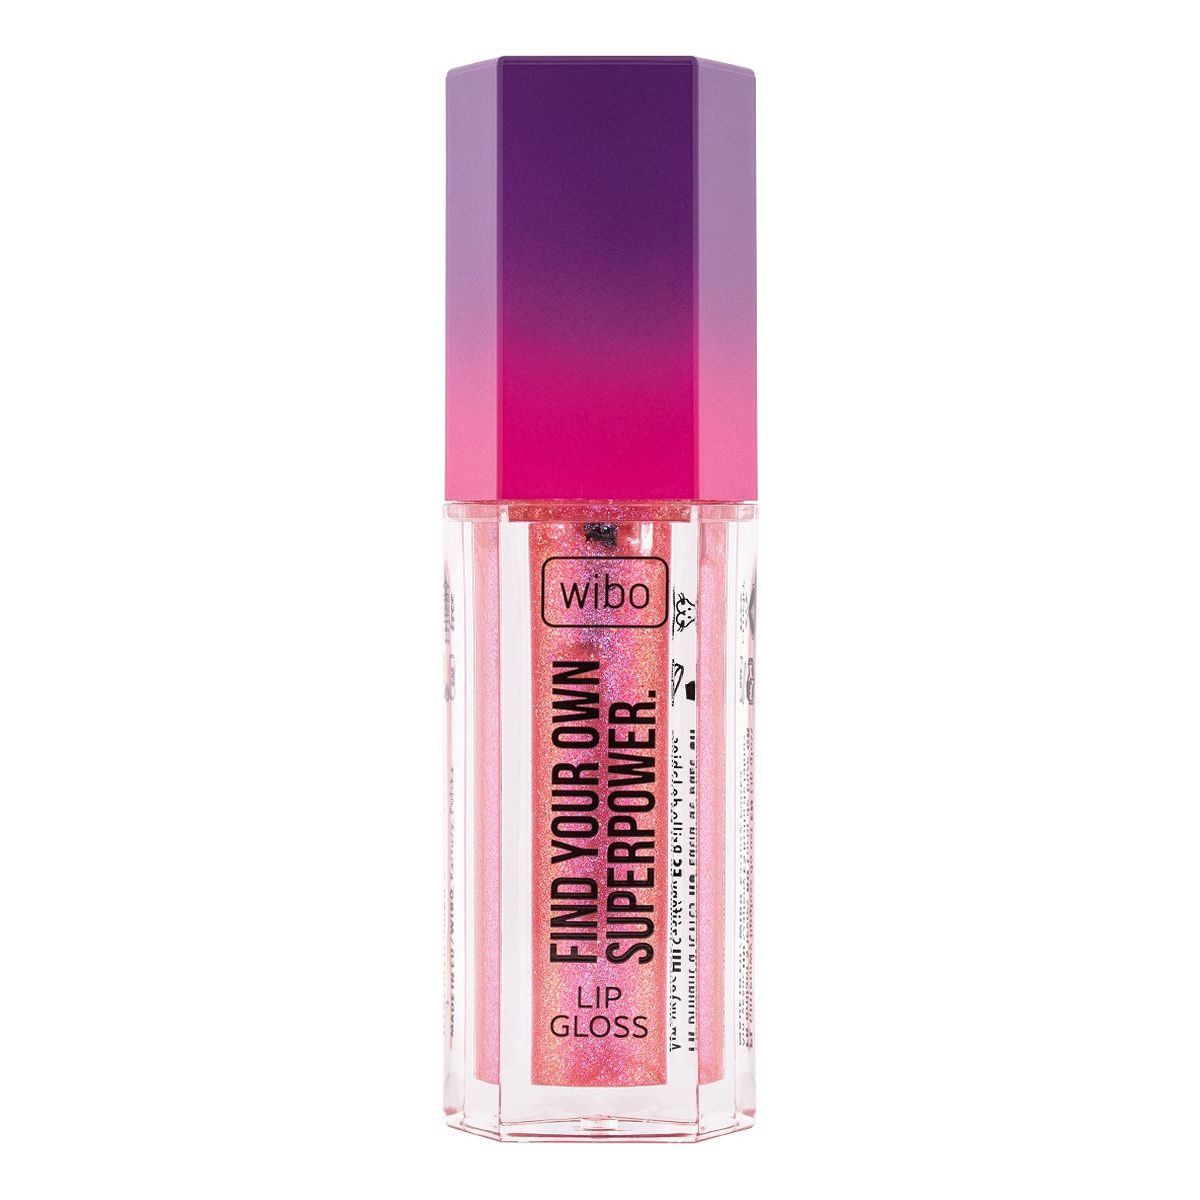 Wibo Find your own superpower lip gloss błyszczyk do ust 02 6g 6g